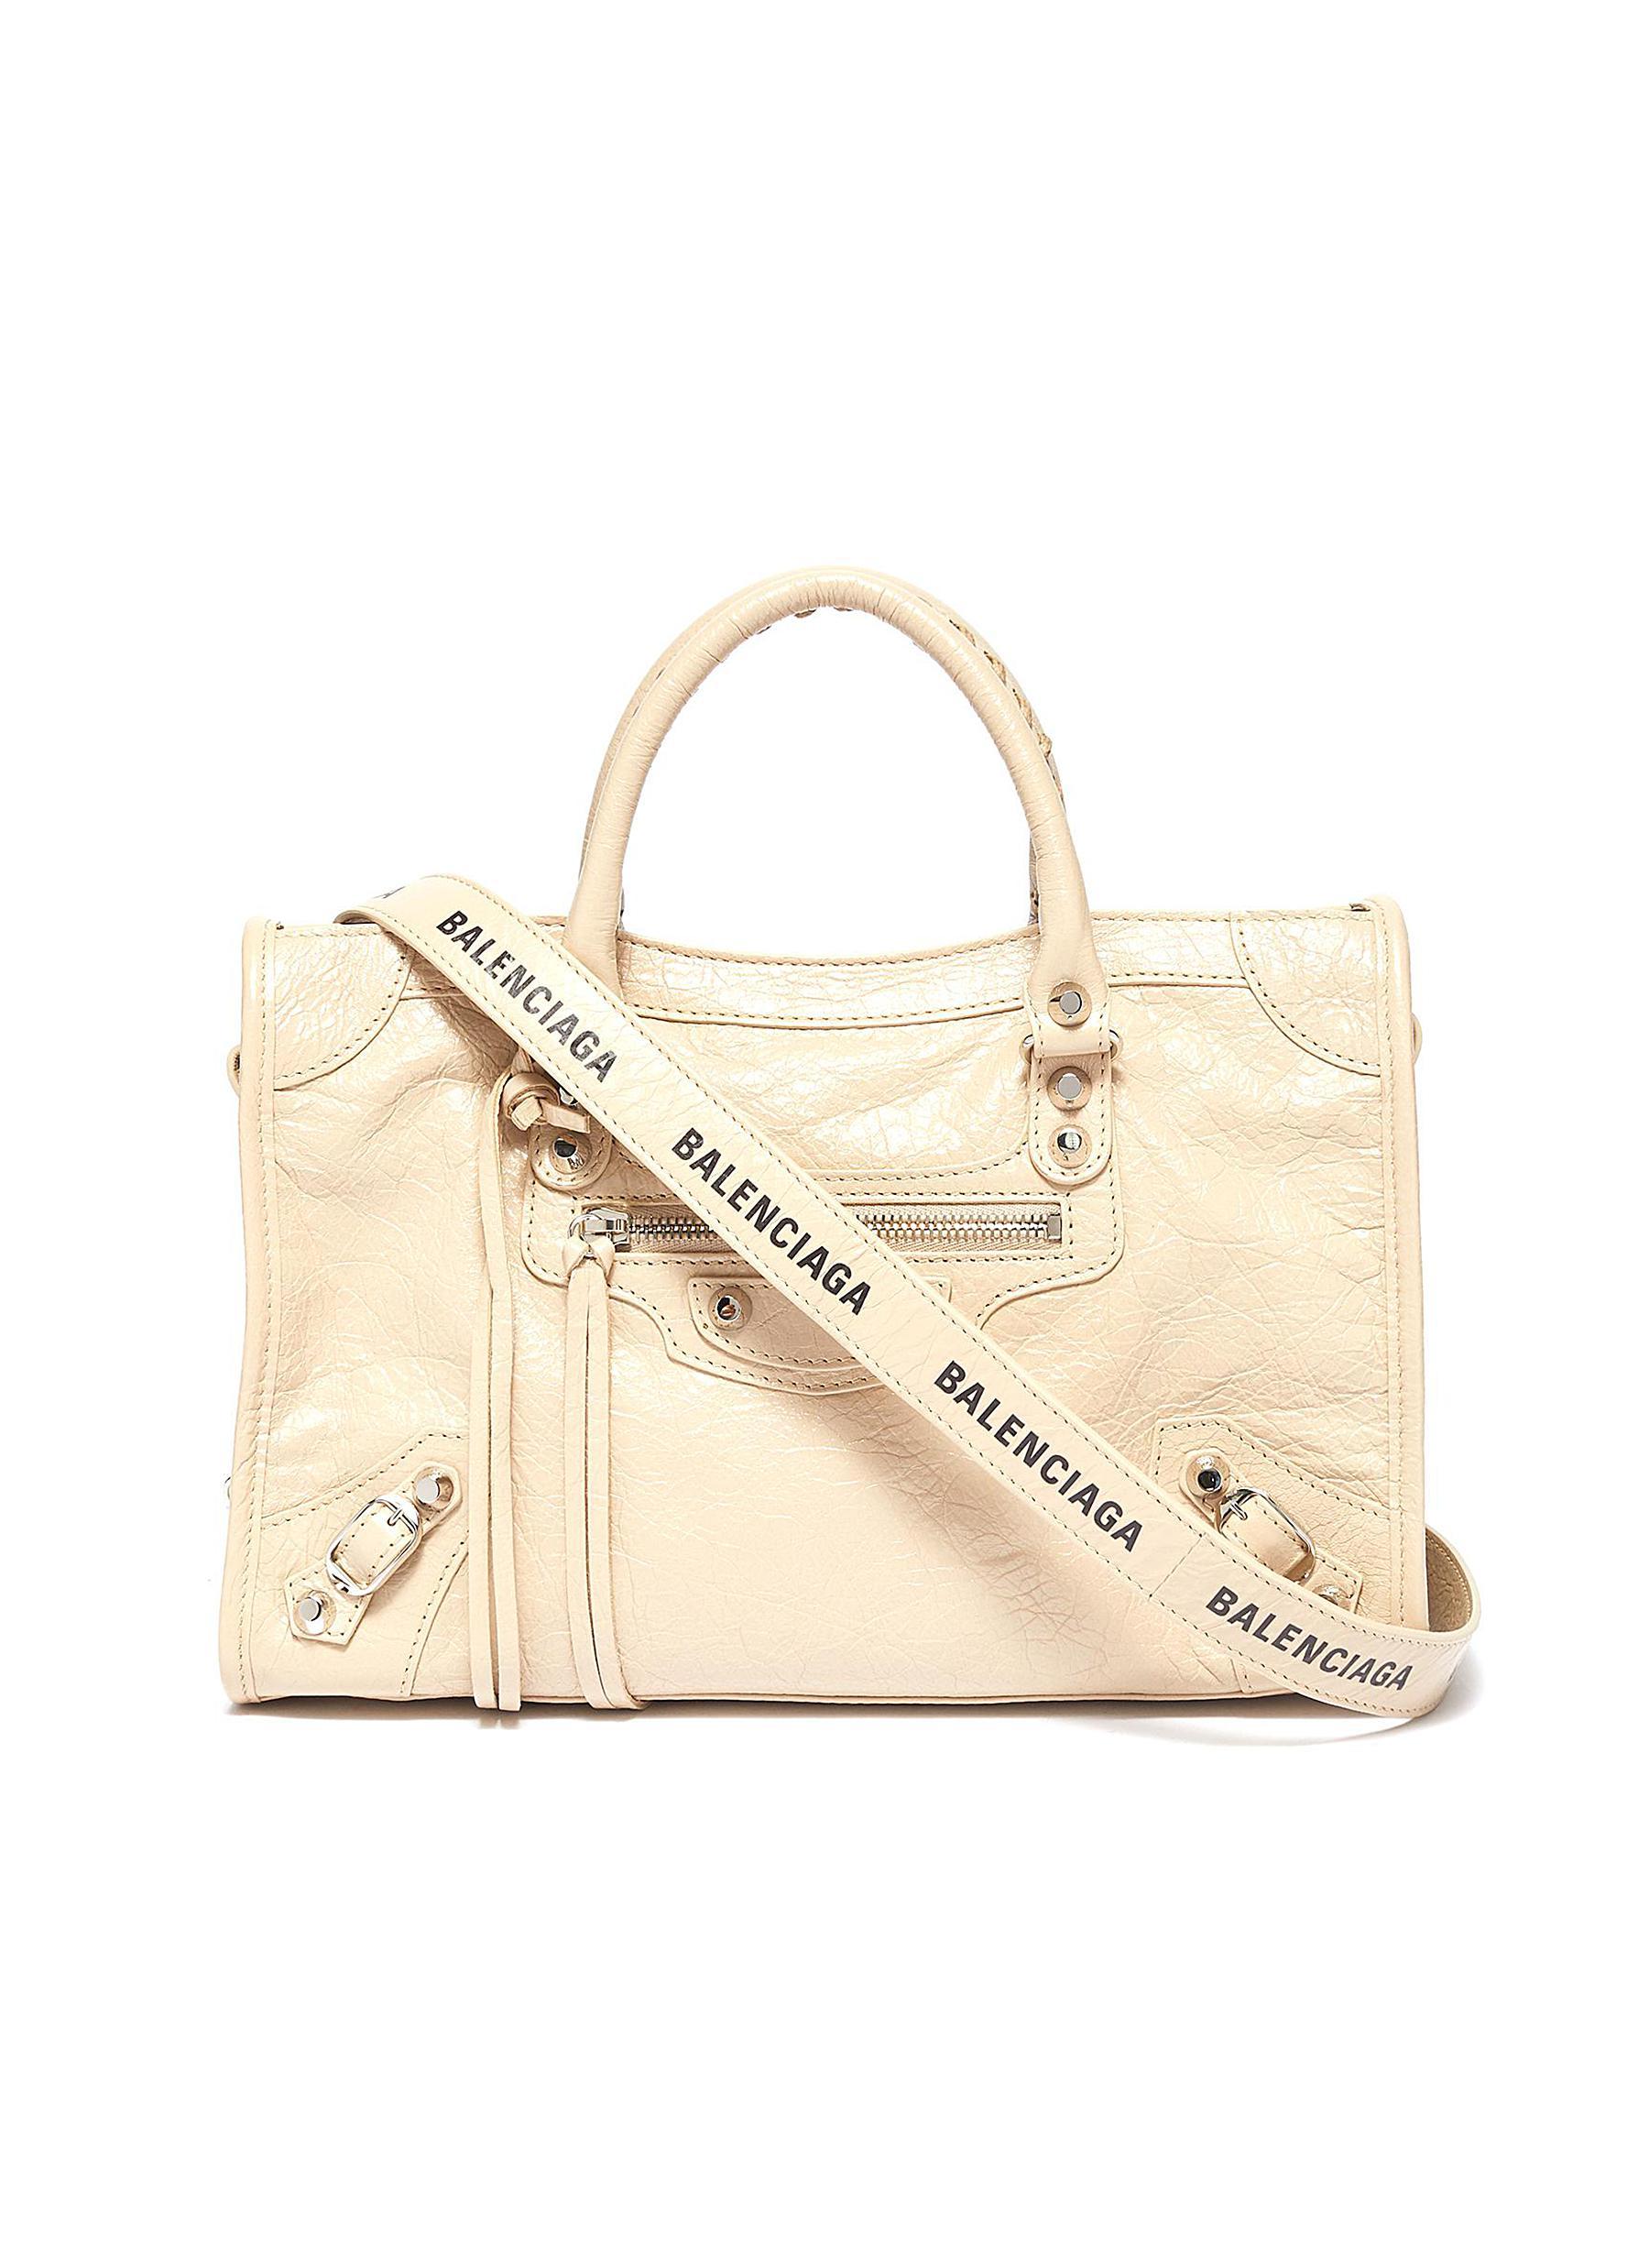 Balenciaga 'classic City' Logo Strap Small Leather Shoulder Bag in Light  Beige (Natural) | Lyst